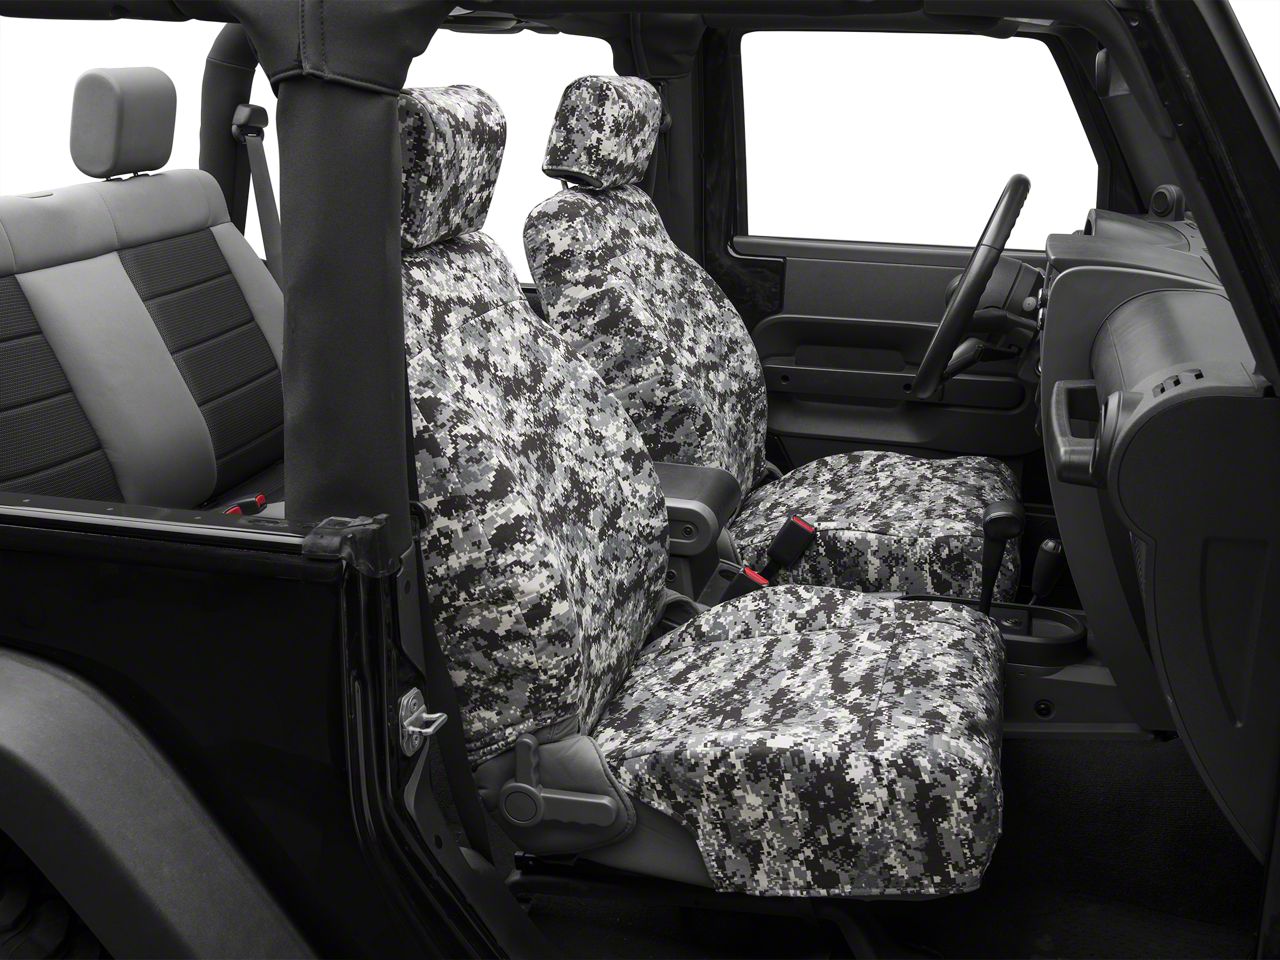 Jeep Wrangler Urban Camouflage Front Seat Covers W Airbags 07 10 Jk 2 Door - 2018 Jeep Wrangler Camo Seat Covers